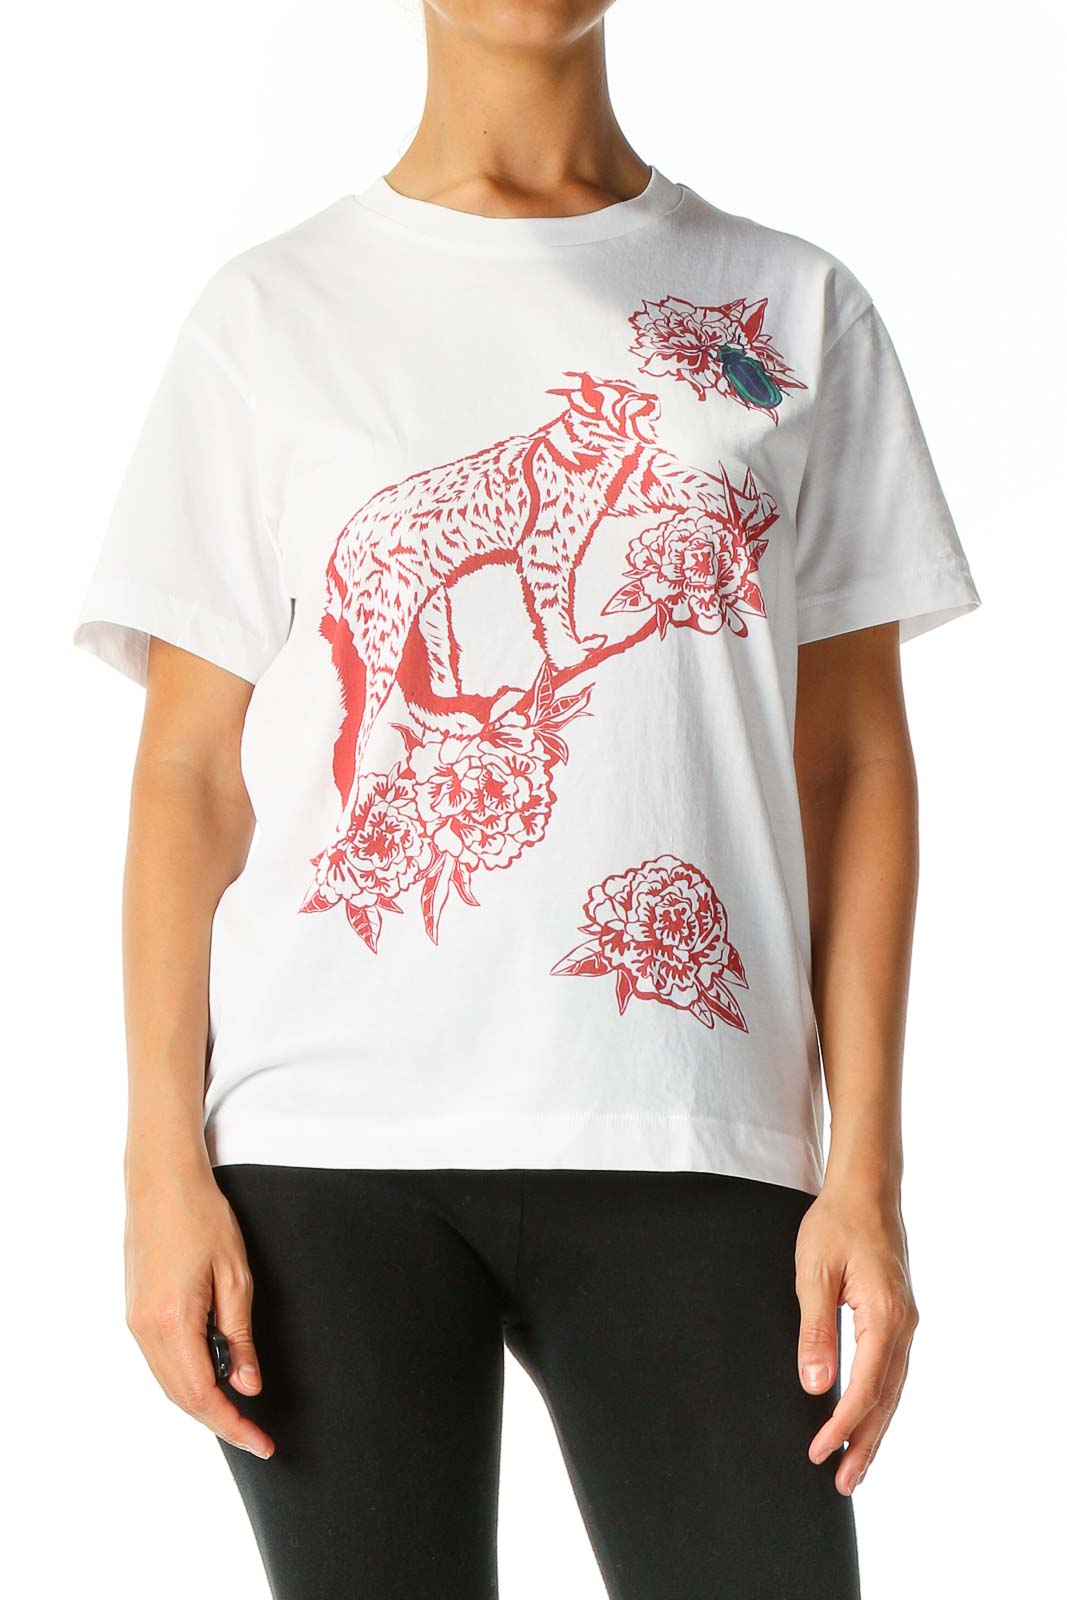 White Graphic Print Casual T-Shirt Front